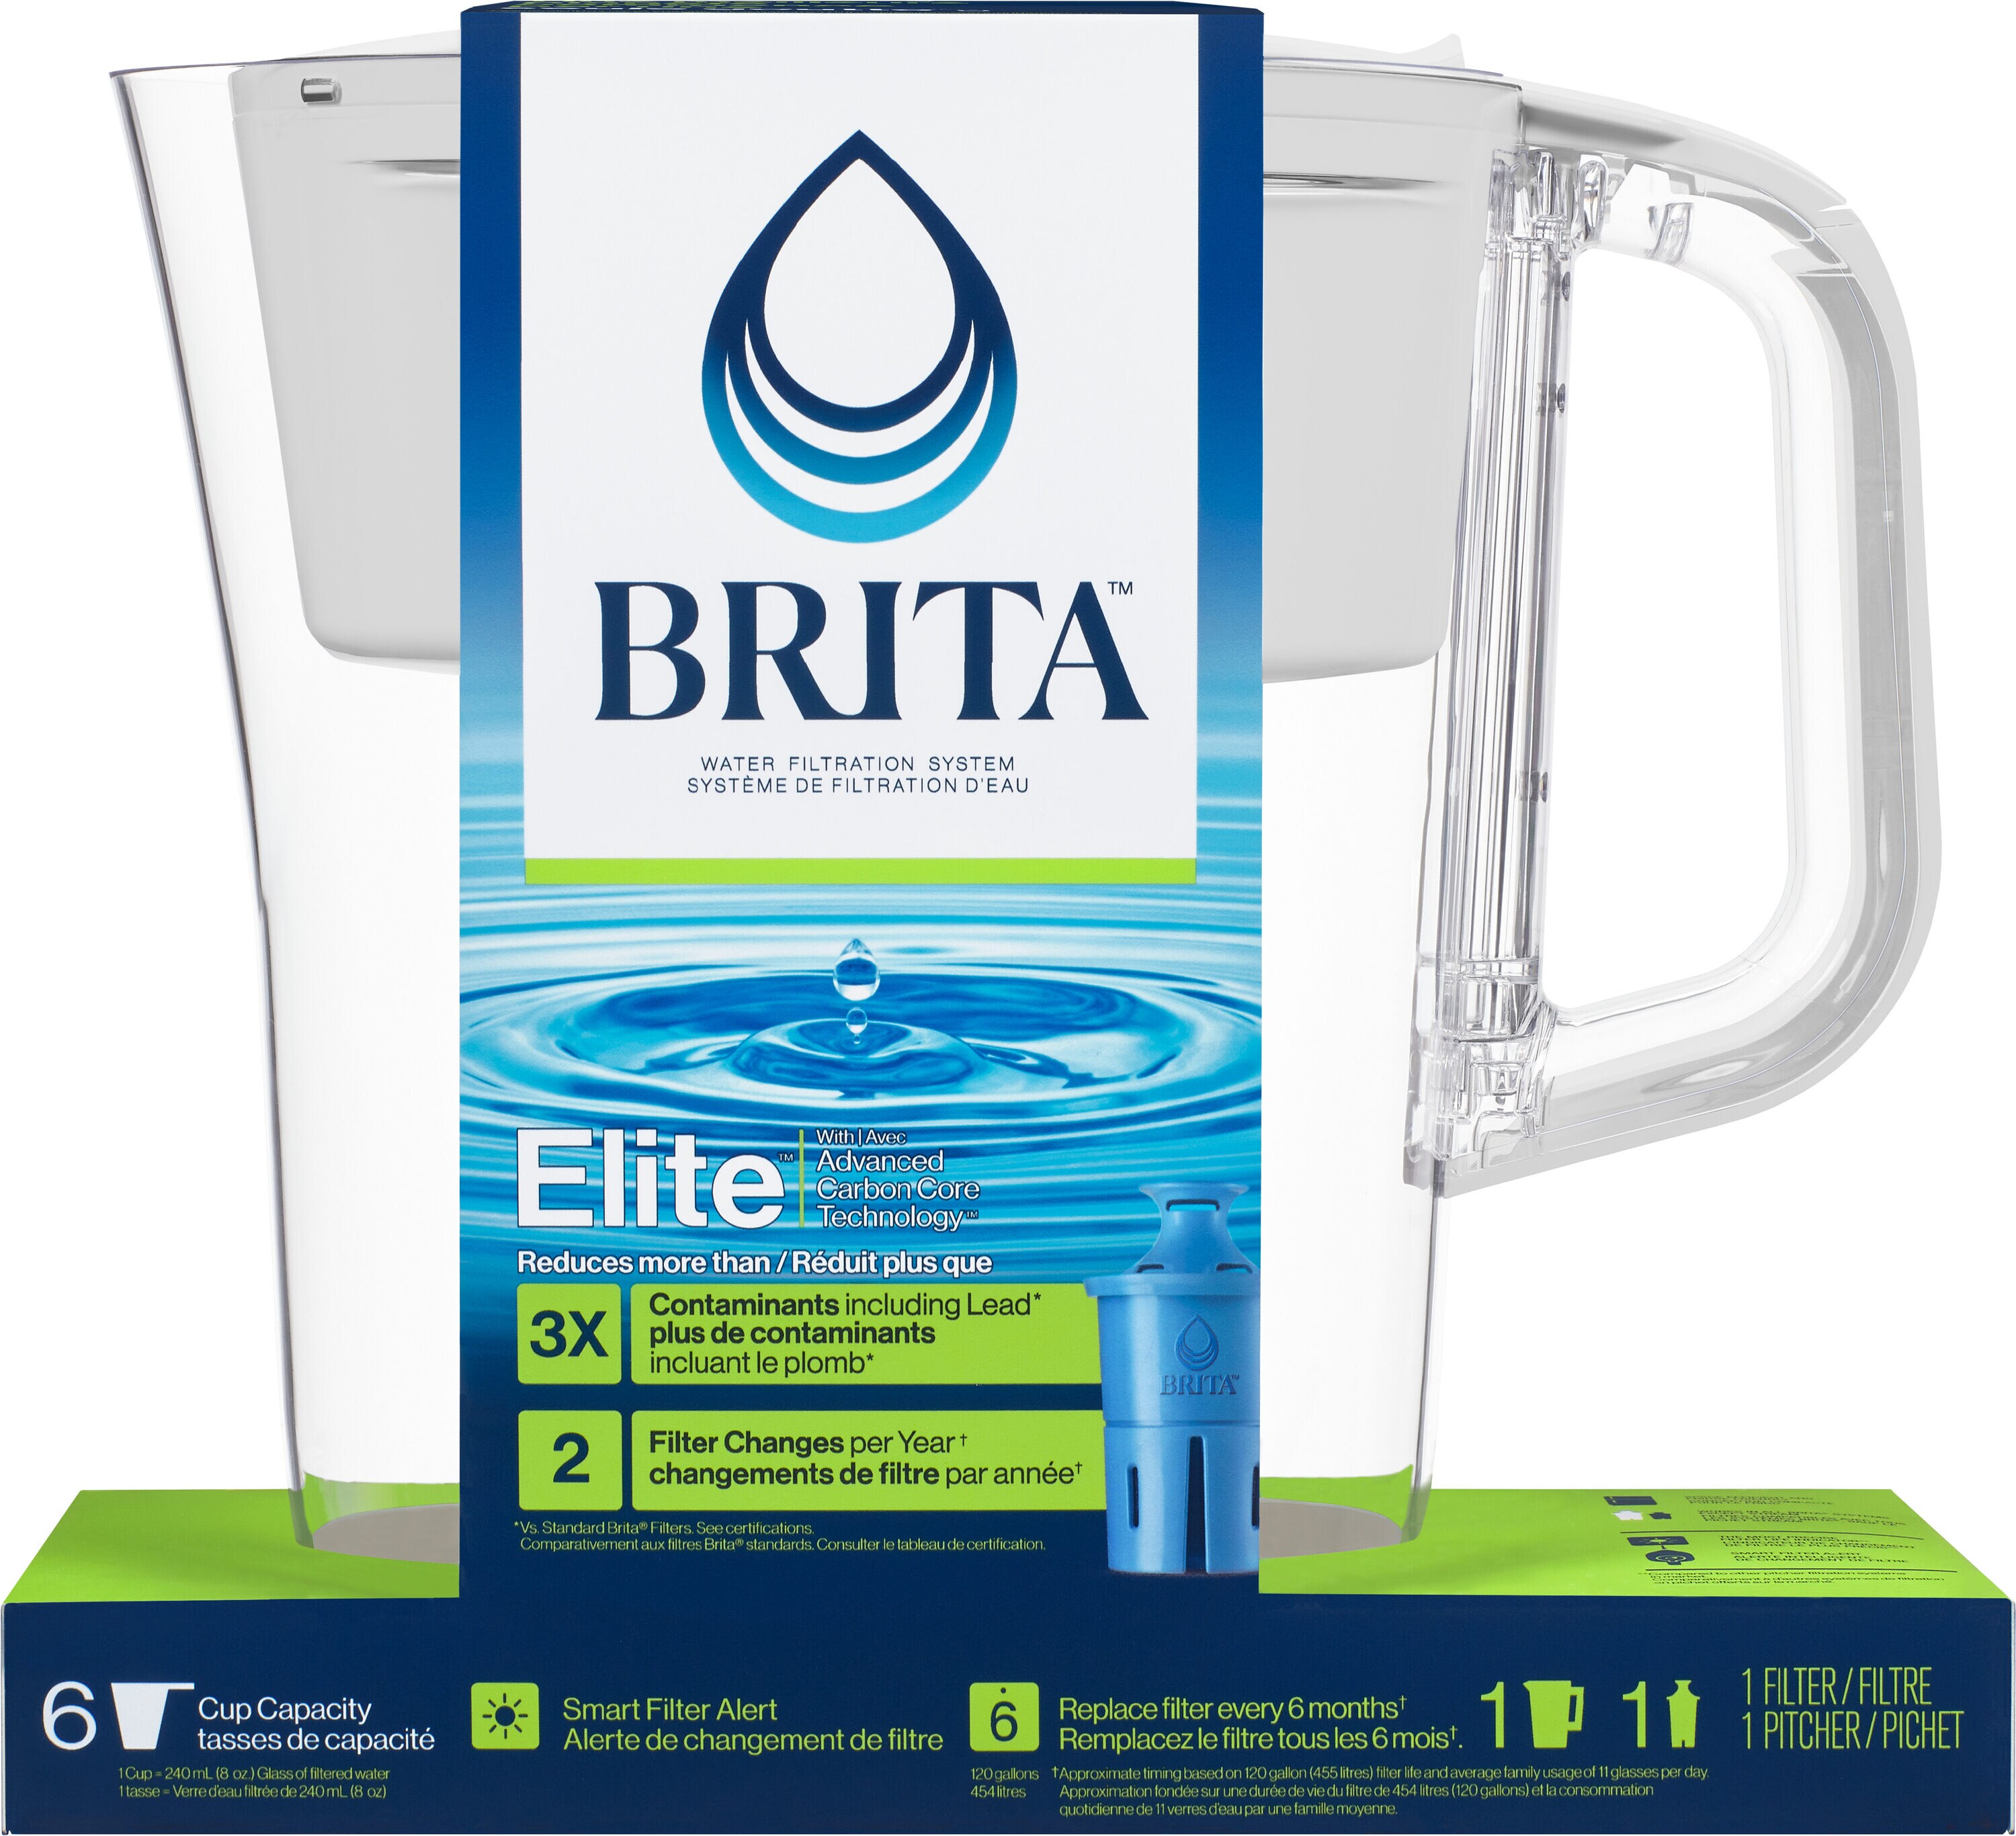 Brita 6-Cup Space Saver Water Filter Pitcher in Red, BPA Free 6025836035 -  The Home Depot